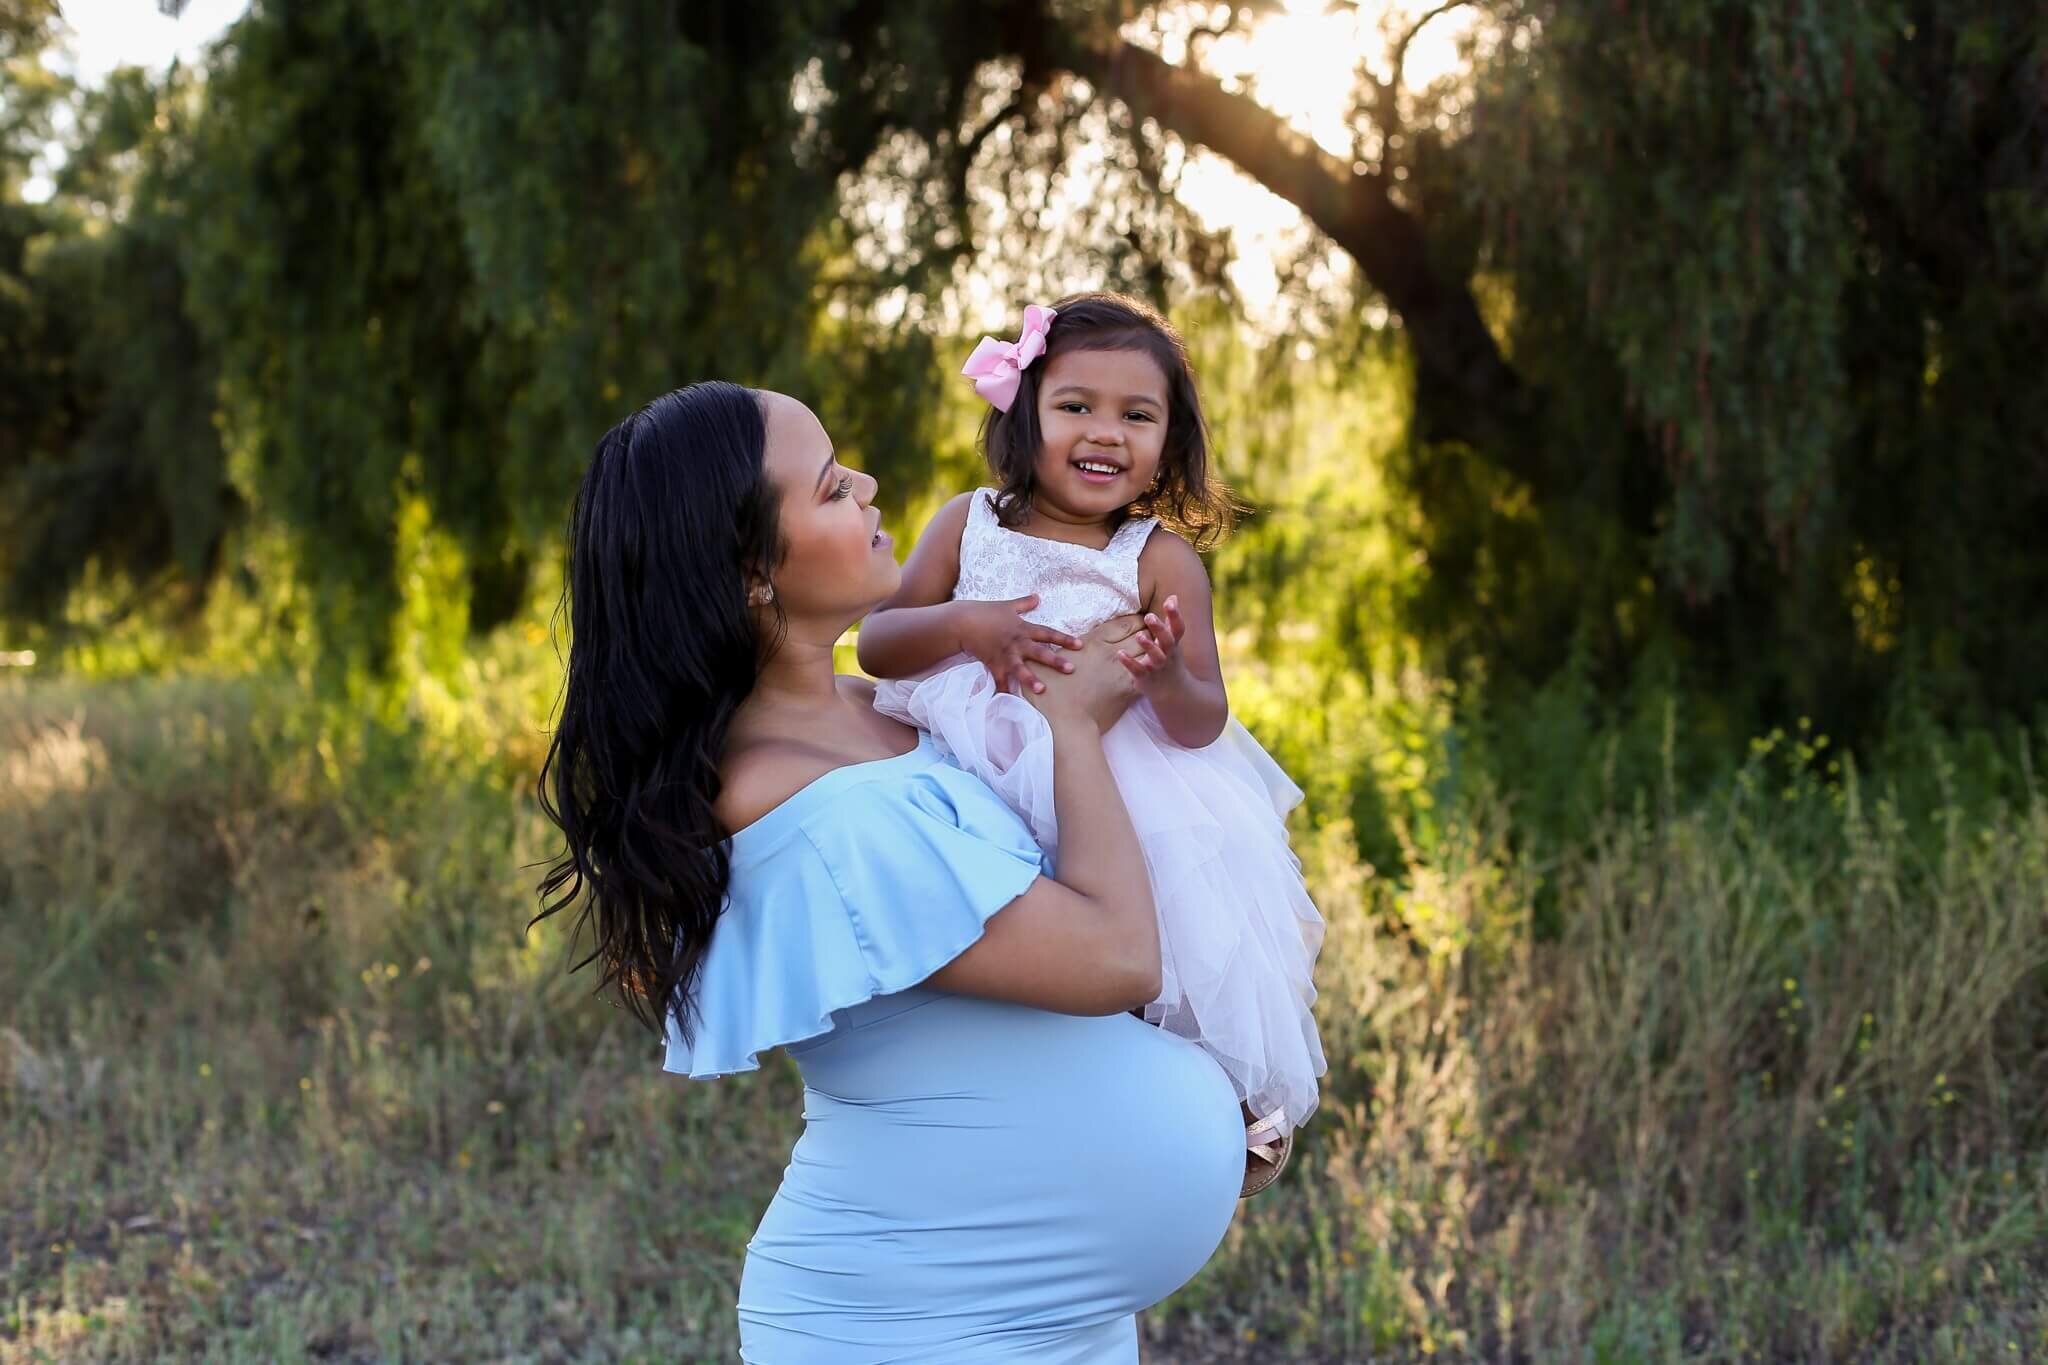  A picture of a pregnant mom holding her young daughter who smiles and enjoys the family time together in a park with sunlight and trees behind them by Photography by L Rose 